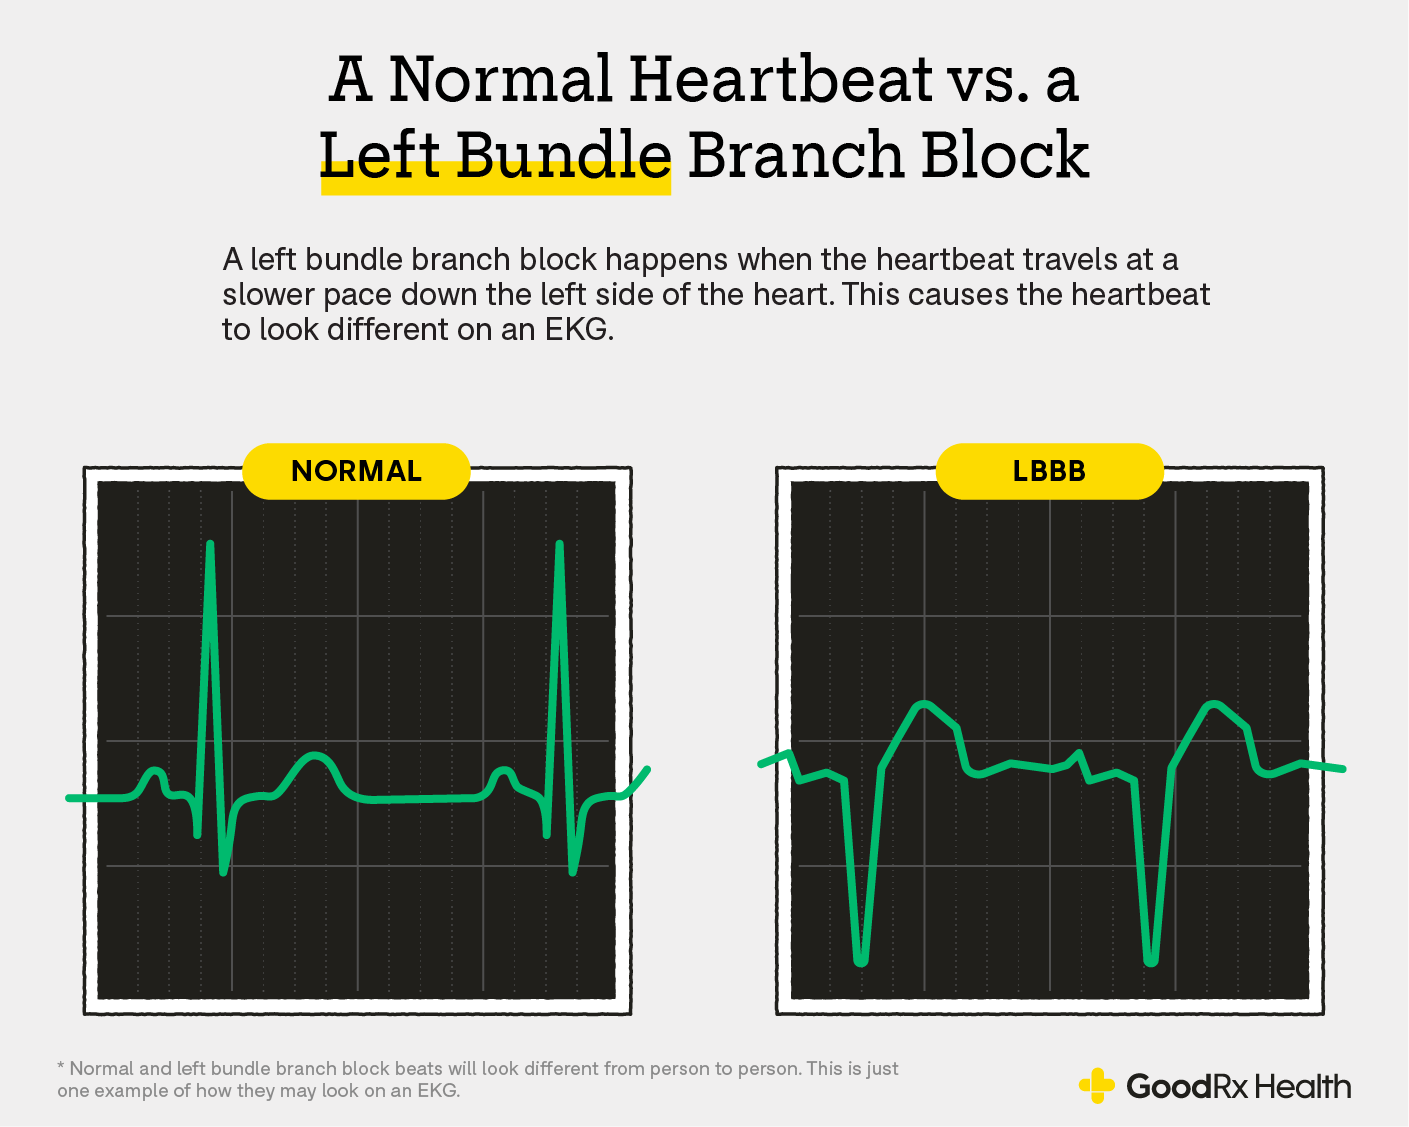 Infographic showing the differences between a normal beat and a left bundle branch block.